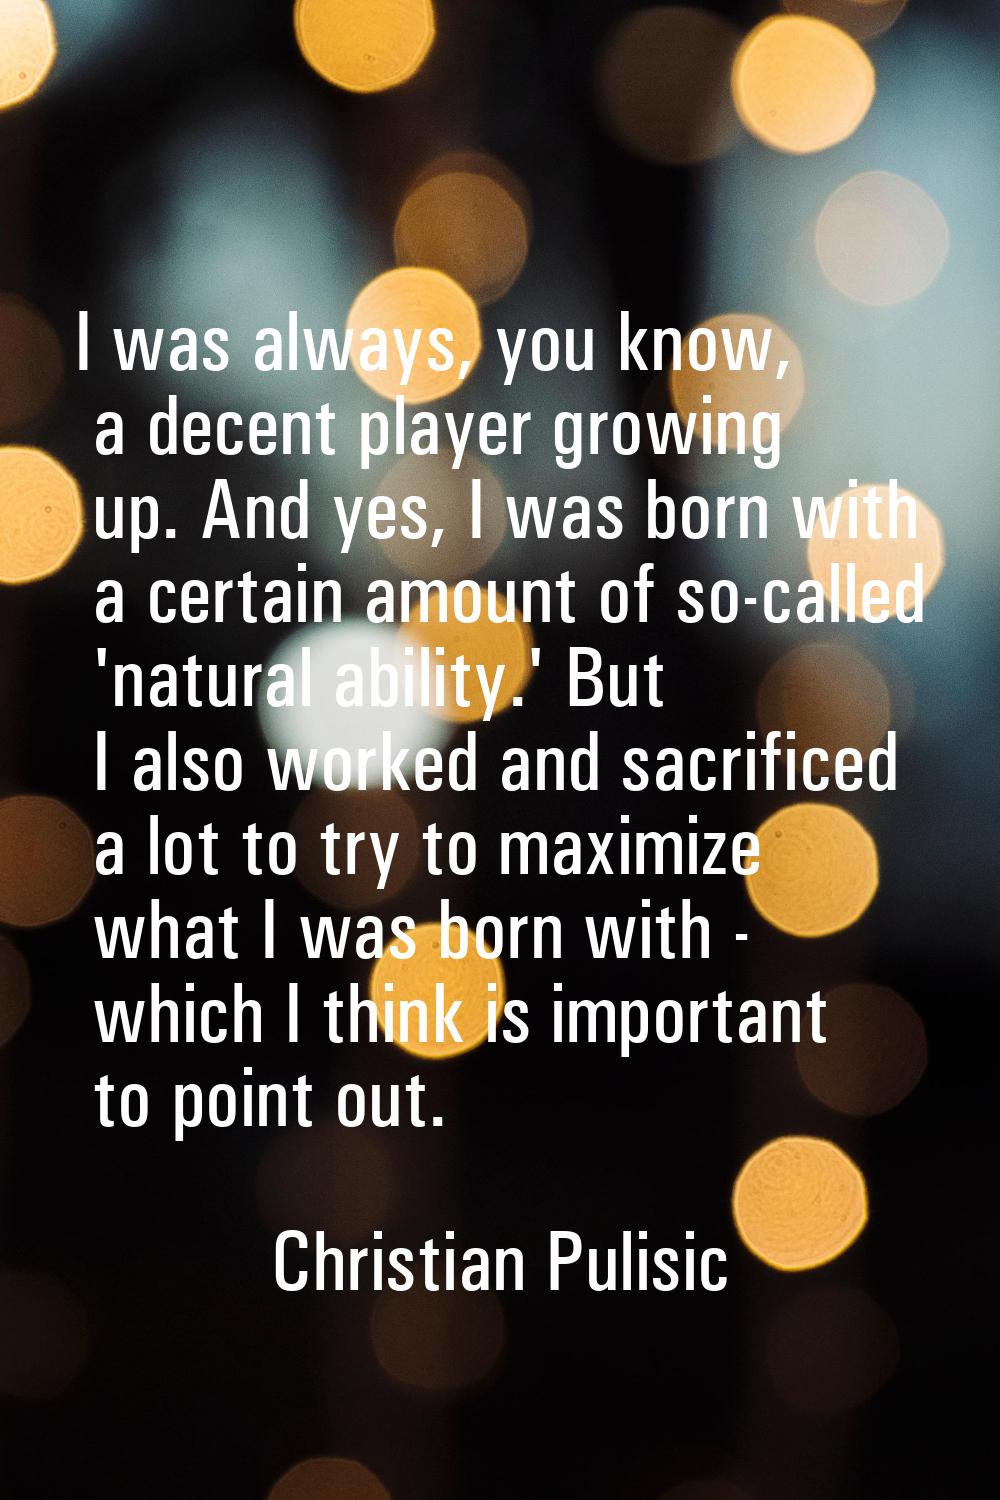 I was always, you know, a decent player growing up. And yes, I was born with a certain amount of so